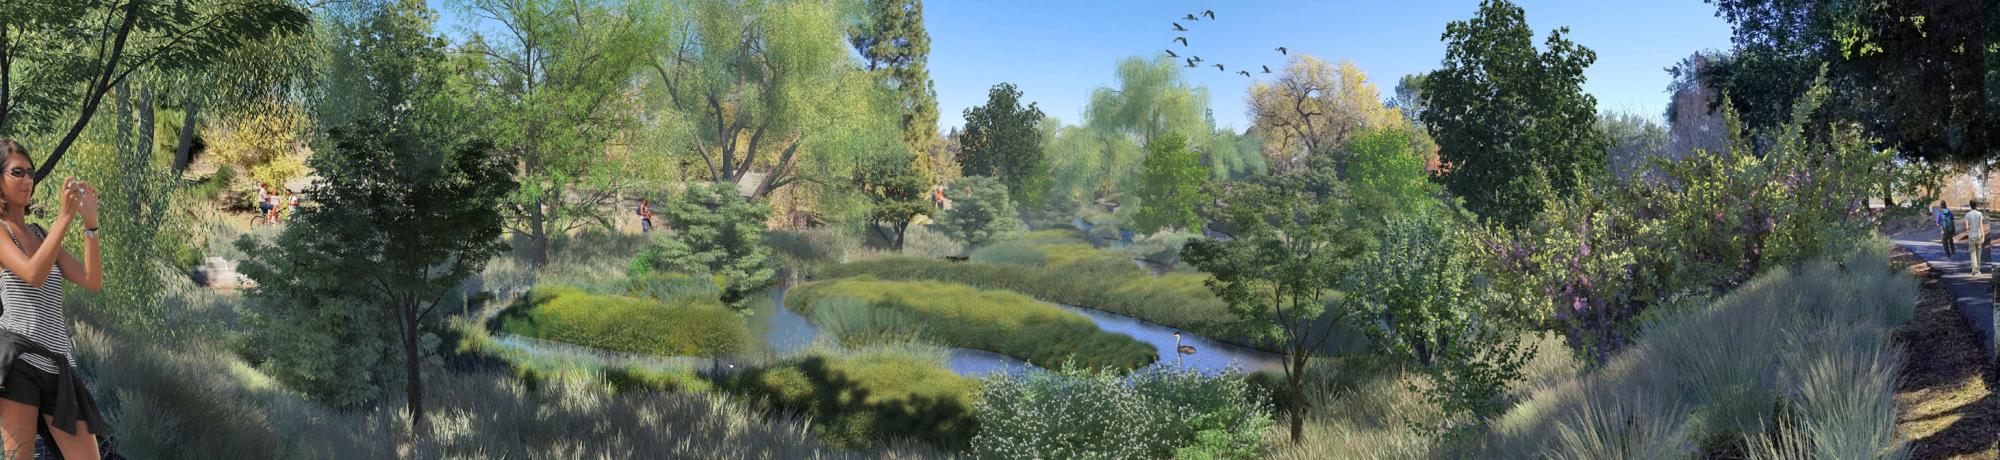 Rendering showing the floodplains and benches slated to be a part of the Arboretum Waterway Flood Protection and Habitat Enhancement Project.